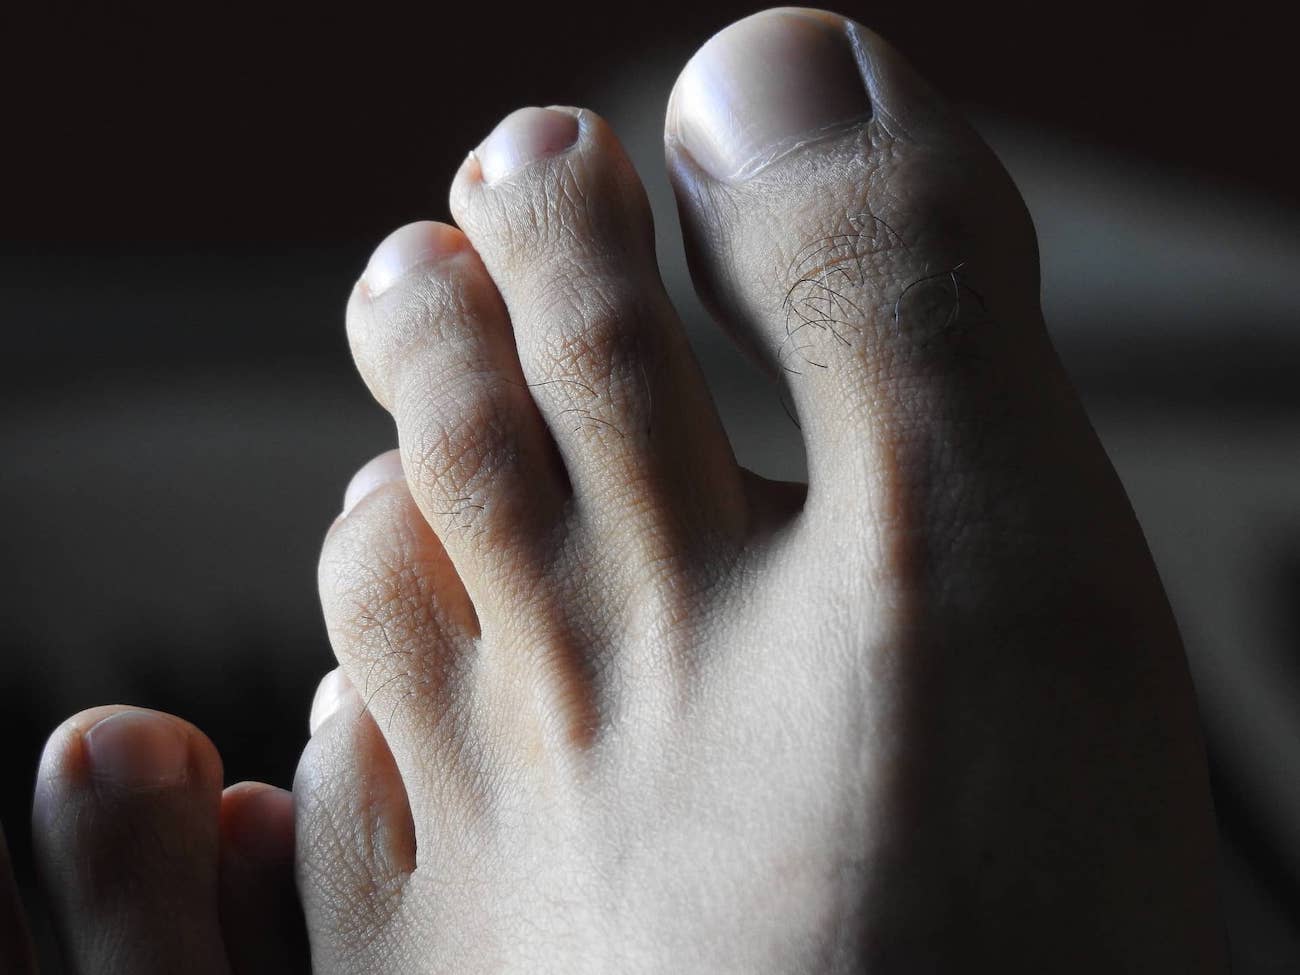 Can I Remove Minor Calluses From My Feet?